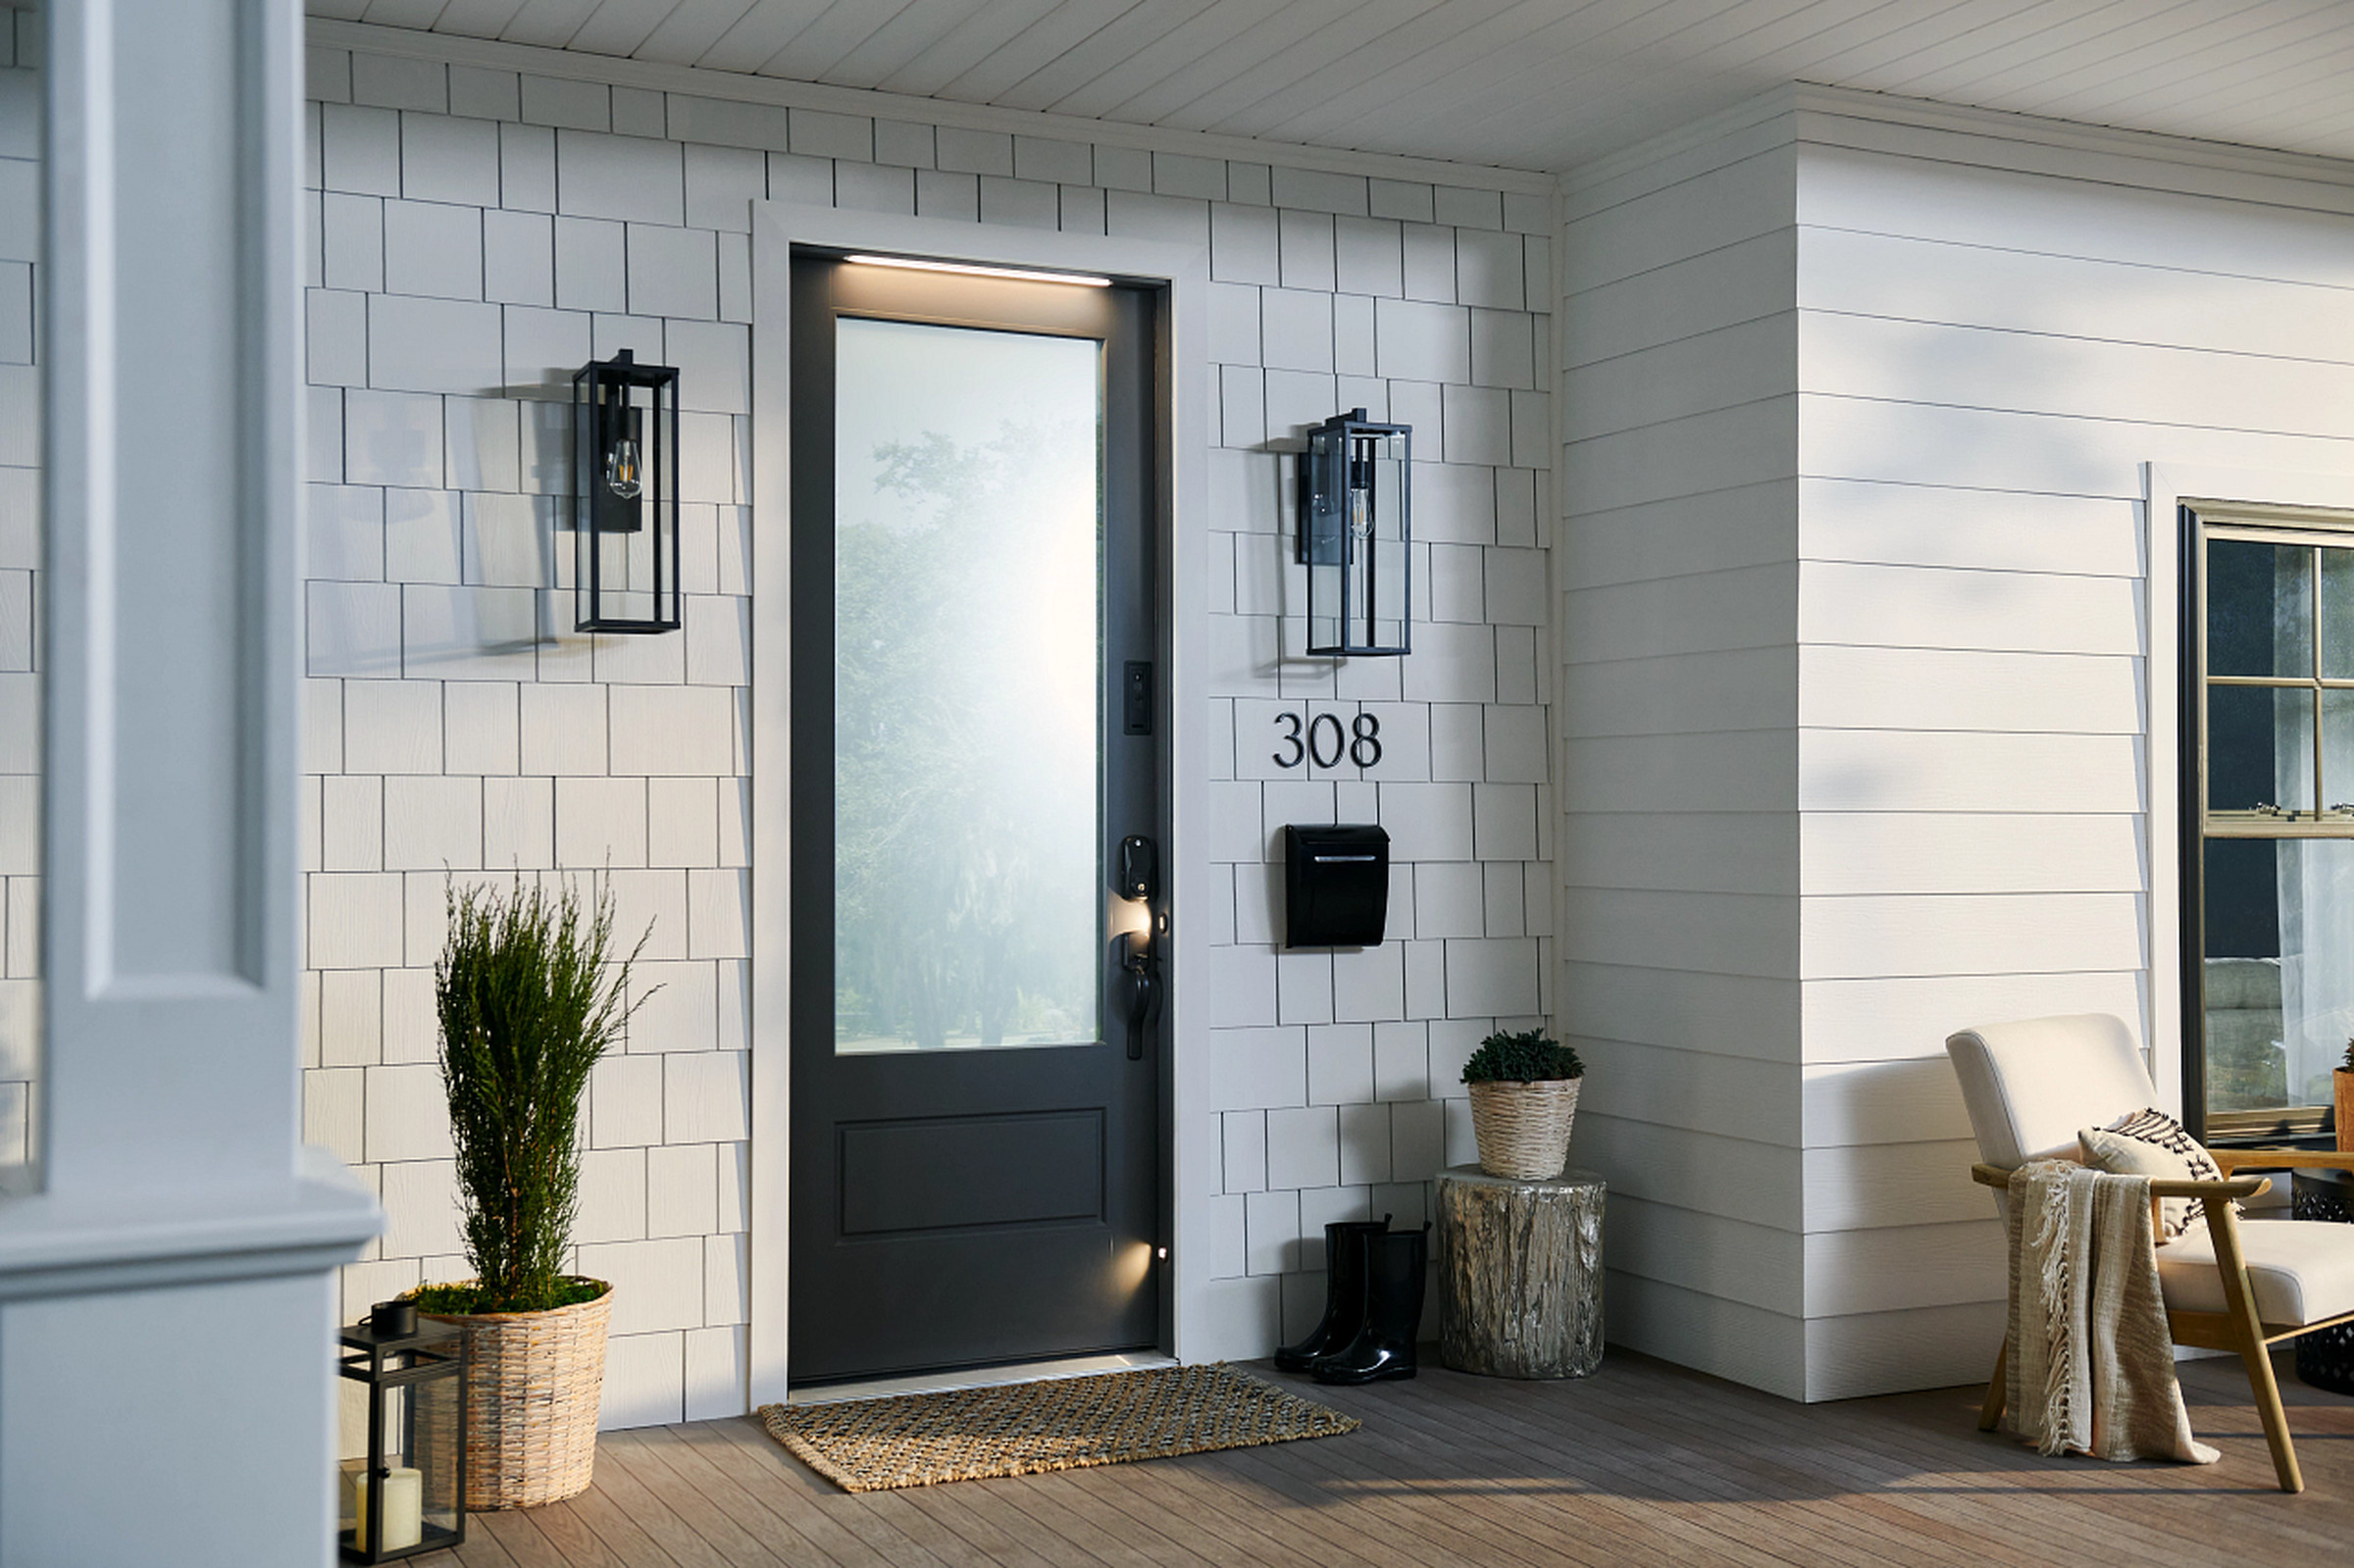 The front porch of a residential house with a Masonite M-Pwr smart door for its main entrance. The door is dark gray with a frosted glass panel, and it has a video doorbell, smart lock, and lighting built into it.